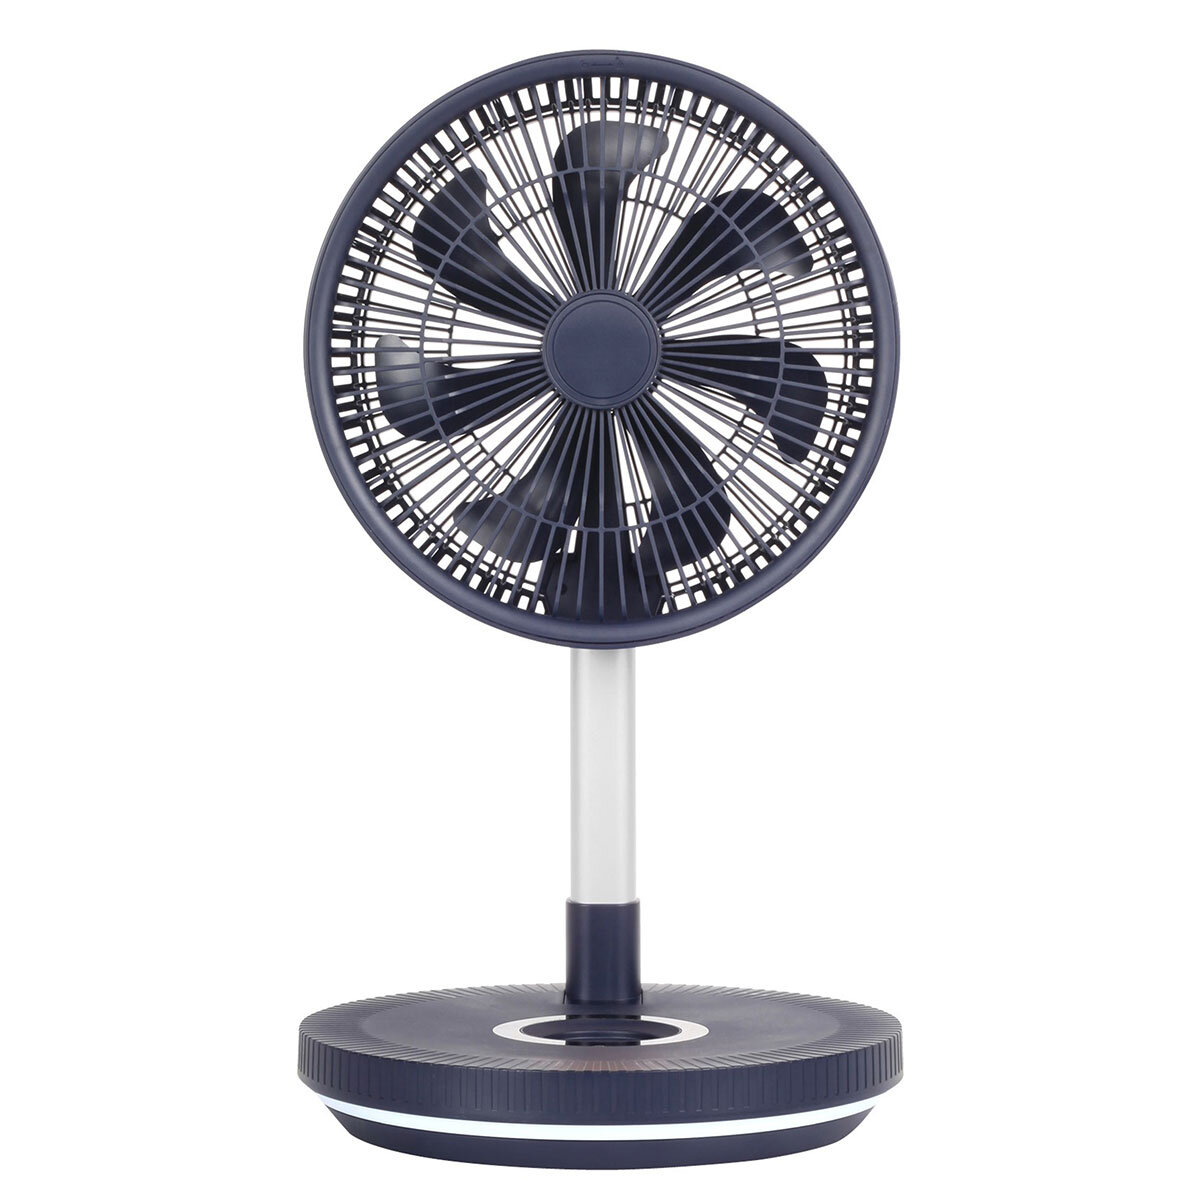 NSA Ultimate Folding-Away Fan with Remote Control, FFDC-24RC Midnight Blue